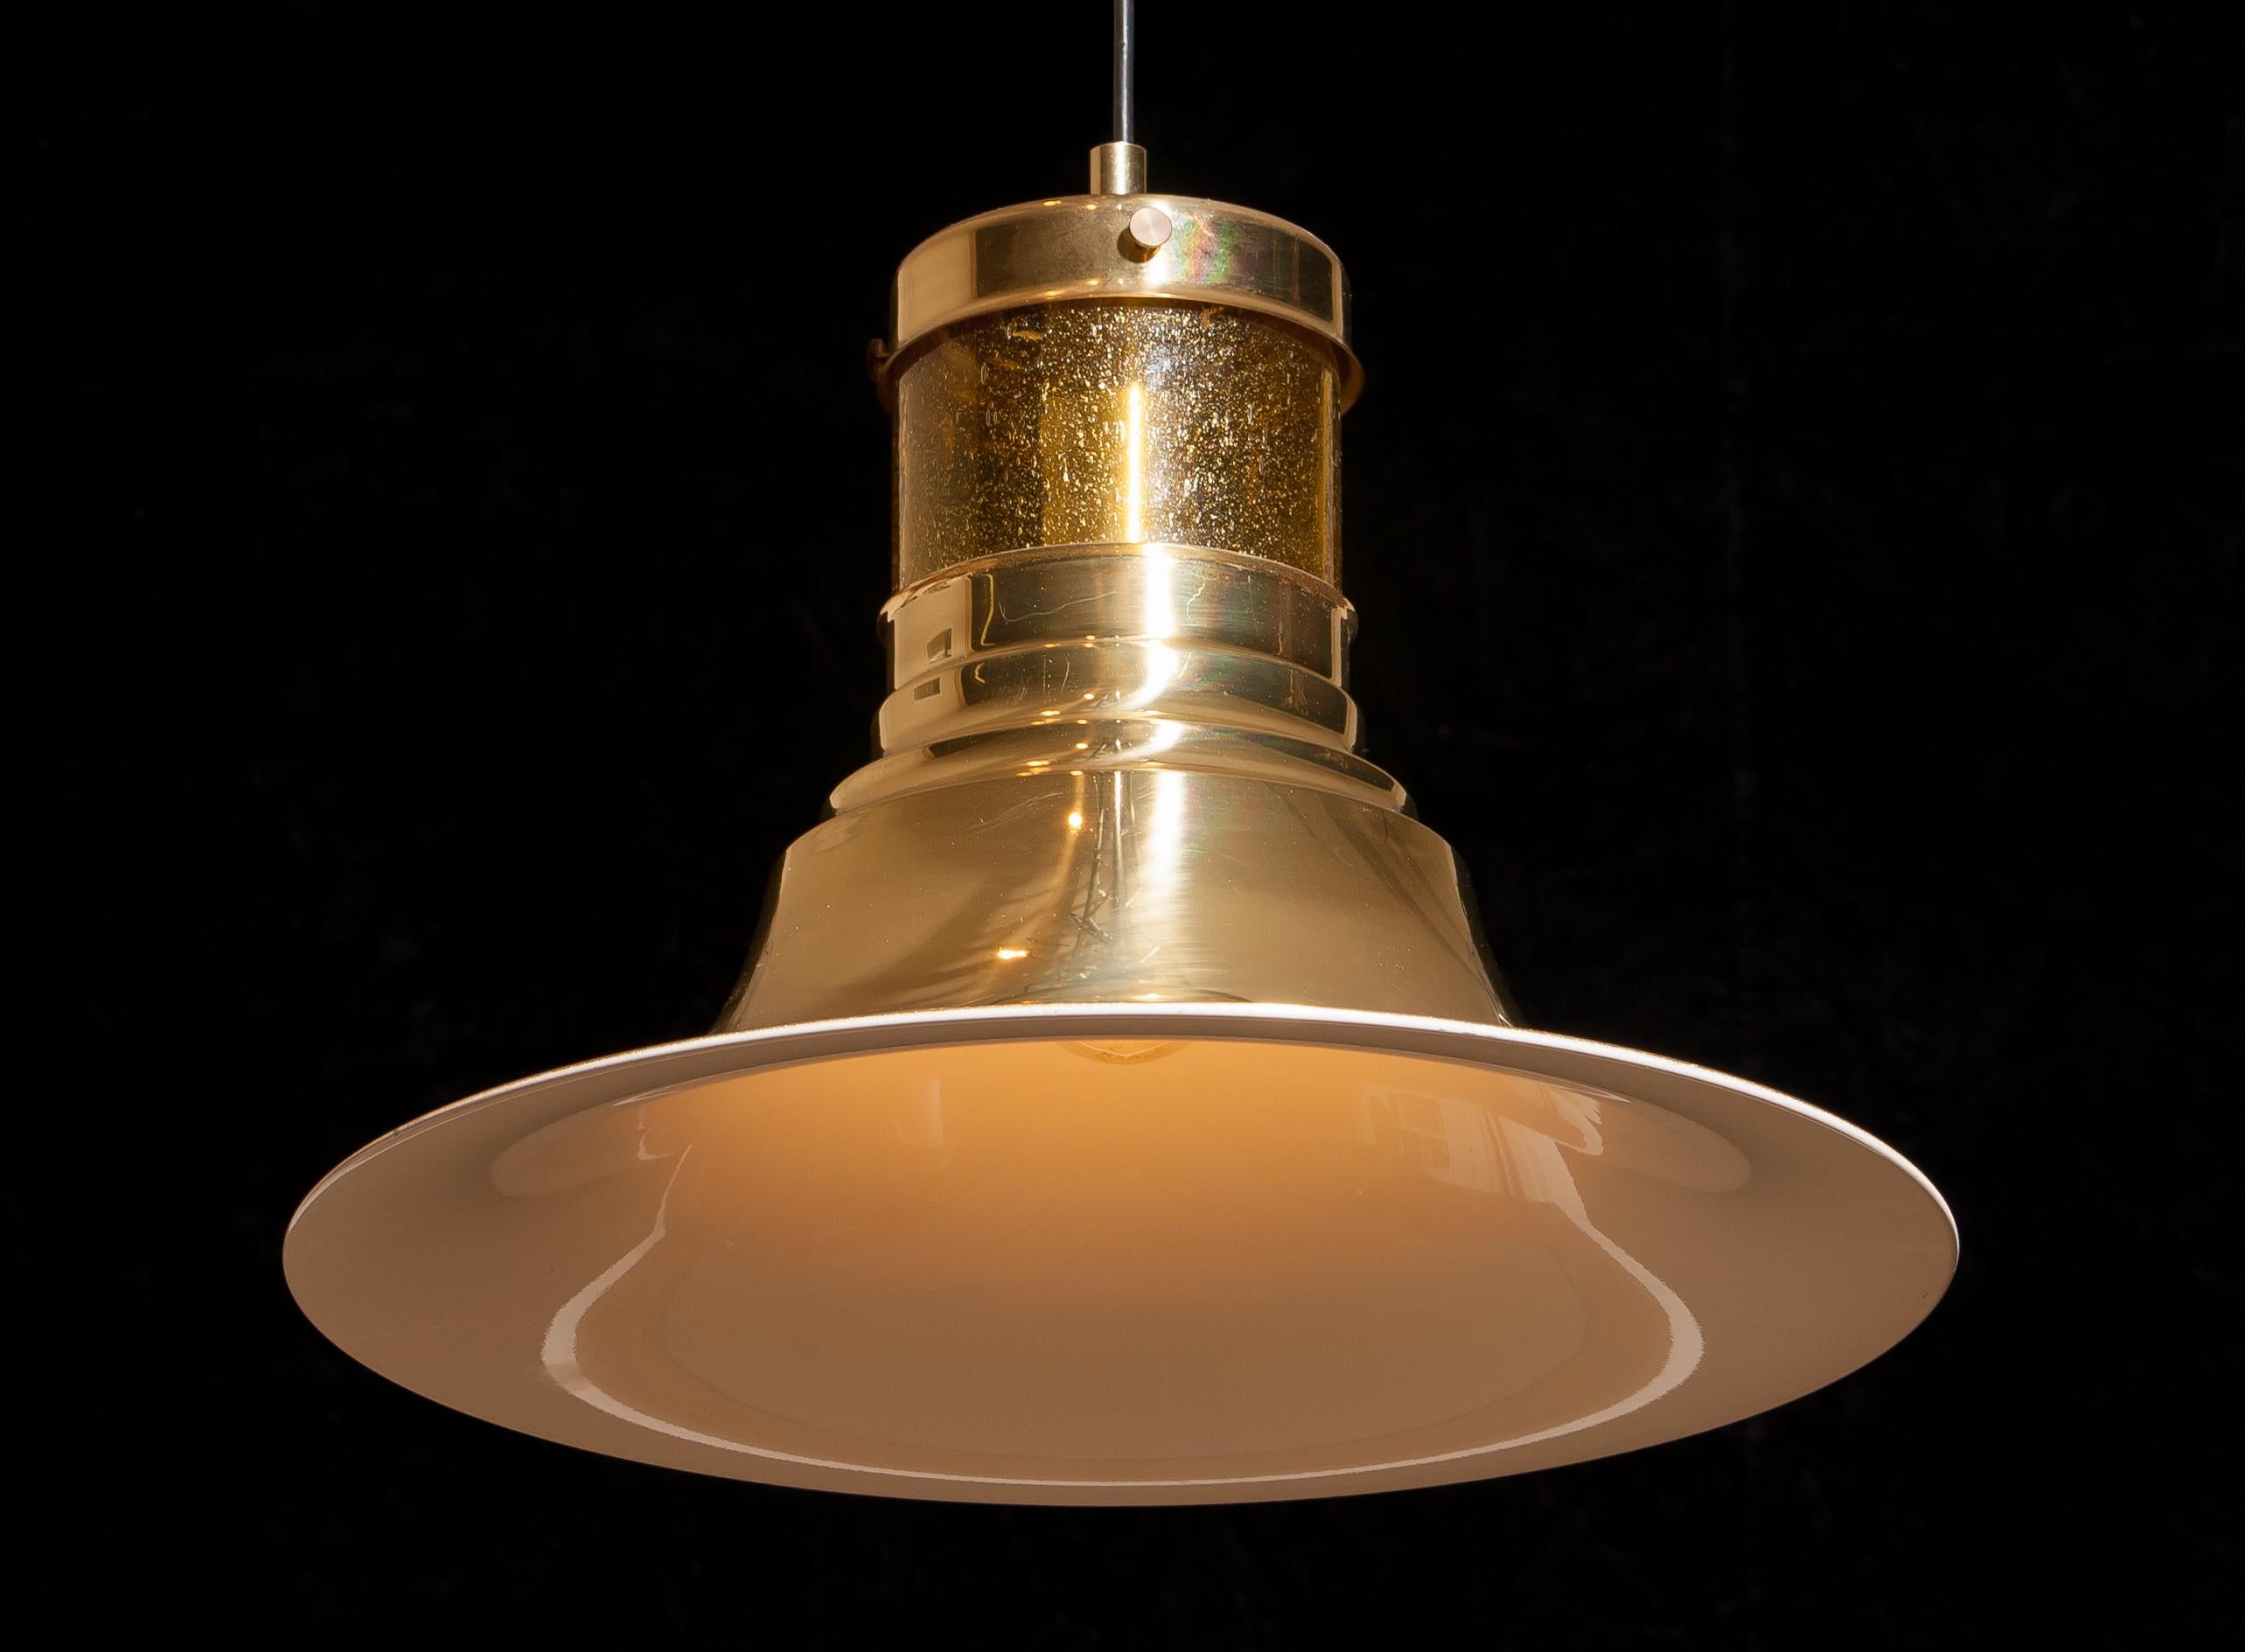 Magnificent pendant designed by Börje Claes for Norellet, Sweden.
This lamp is made of brass with an enamel white inside and a yellow cylinder of glass.
The beautiful shape makes that it gives a wonderful shining.
Period 1970s.
Dimensions: H 32